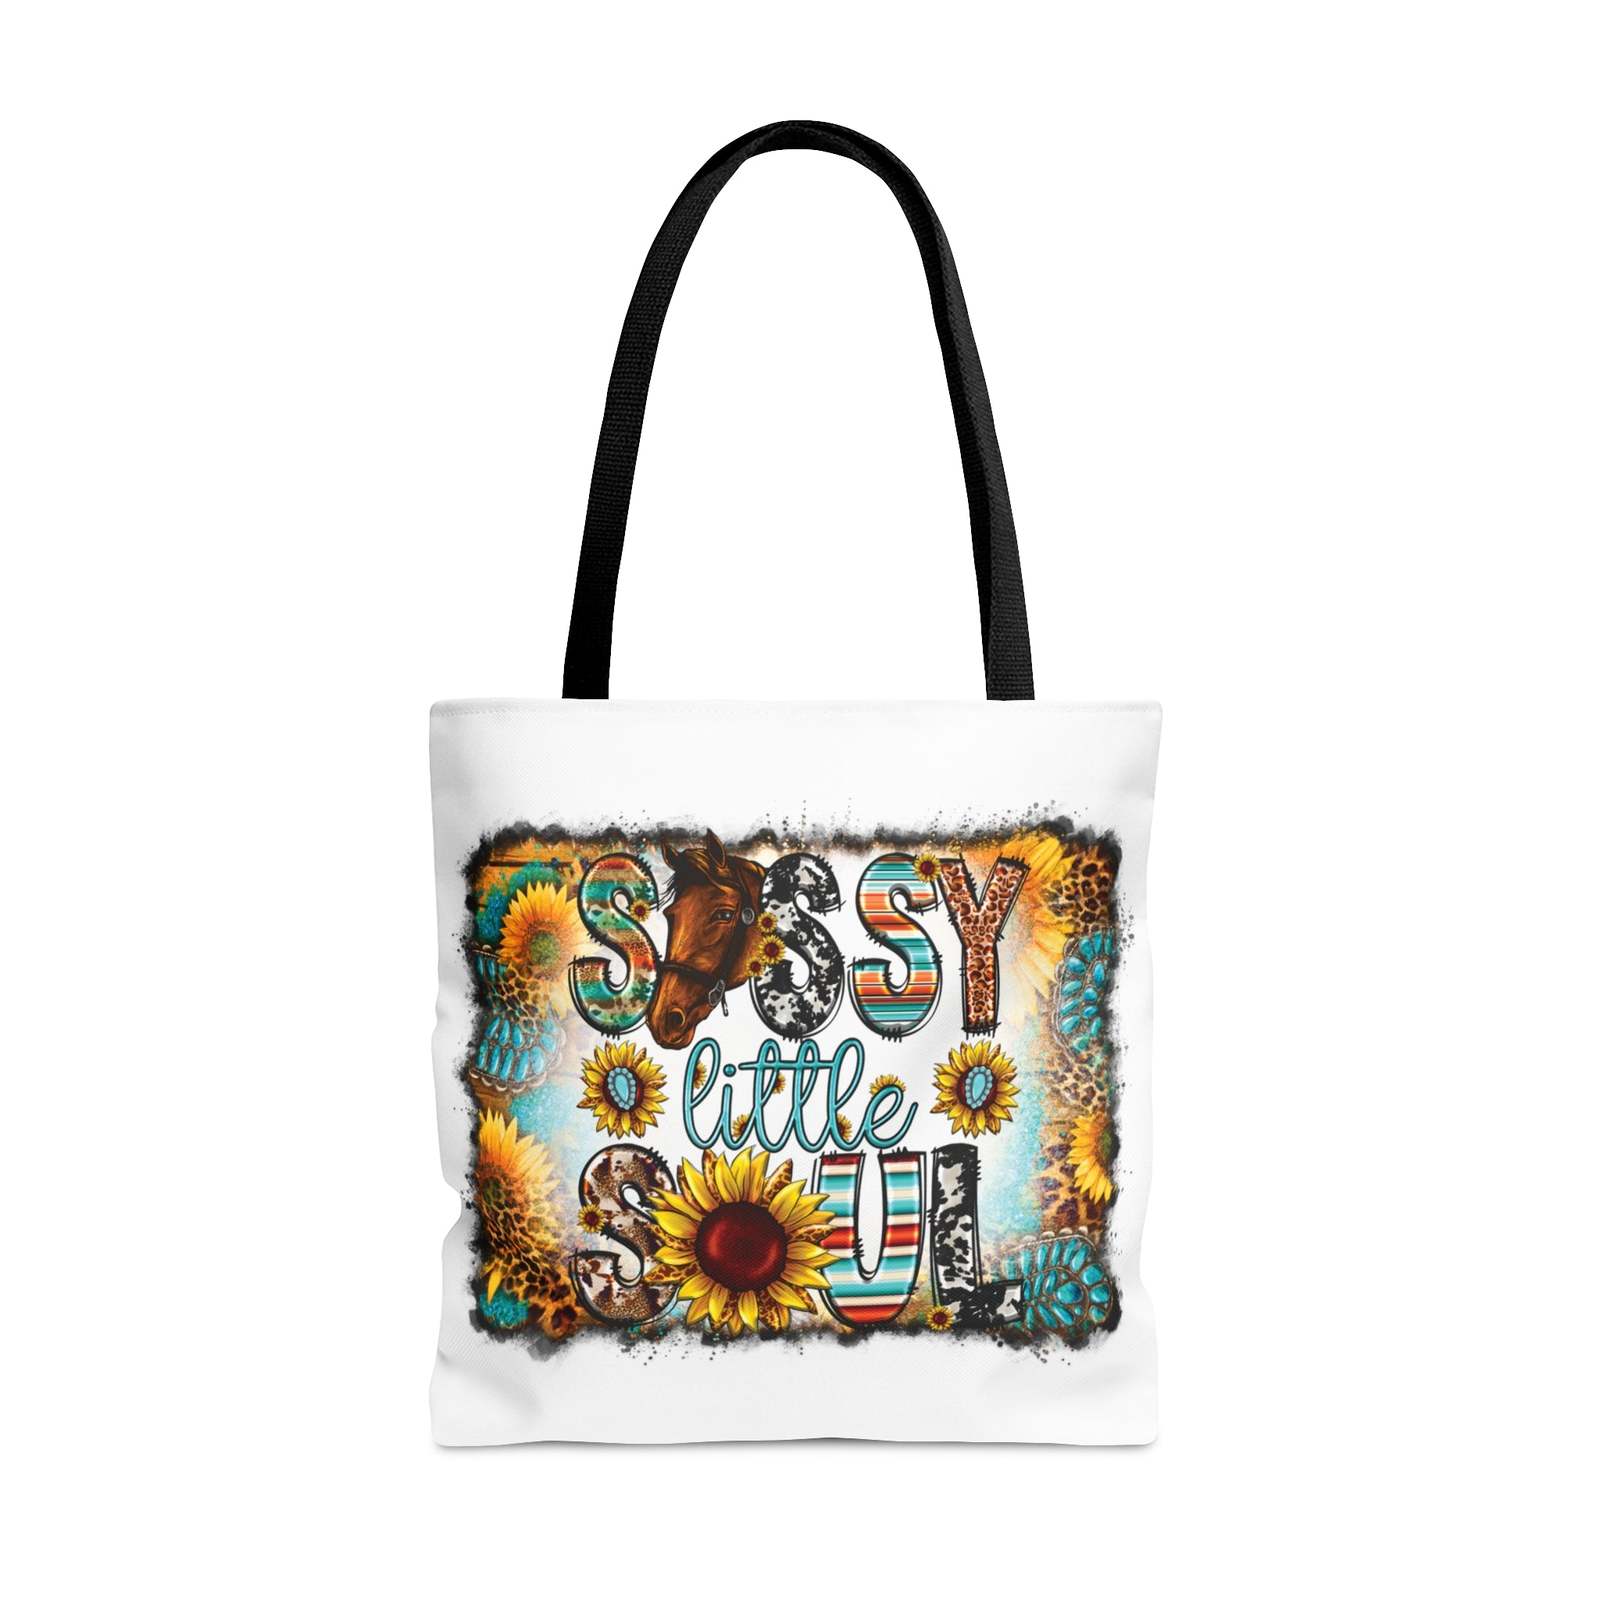 Primary image for Tote Bag, Western, Sassy Little Soul, Personalised/Non-Personalised Tote bag, 3 